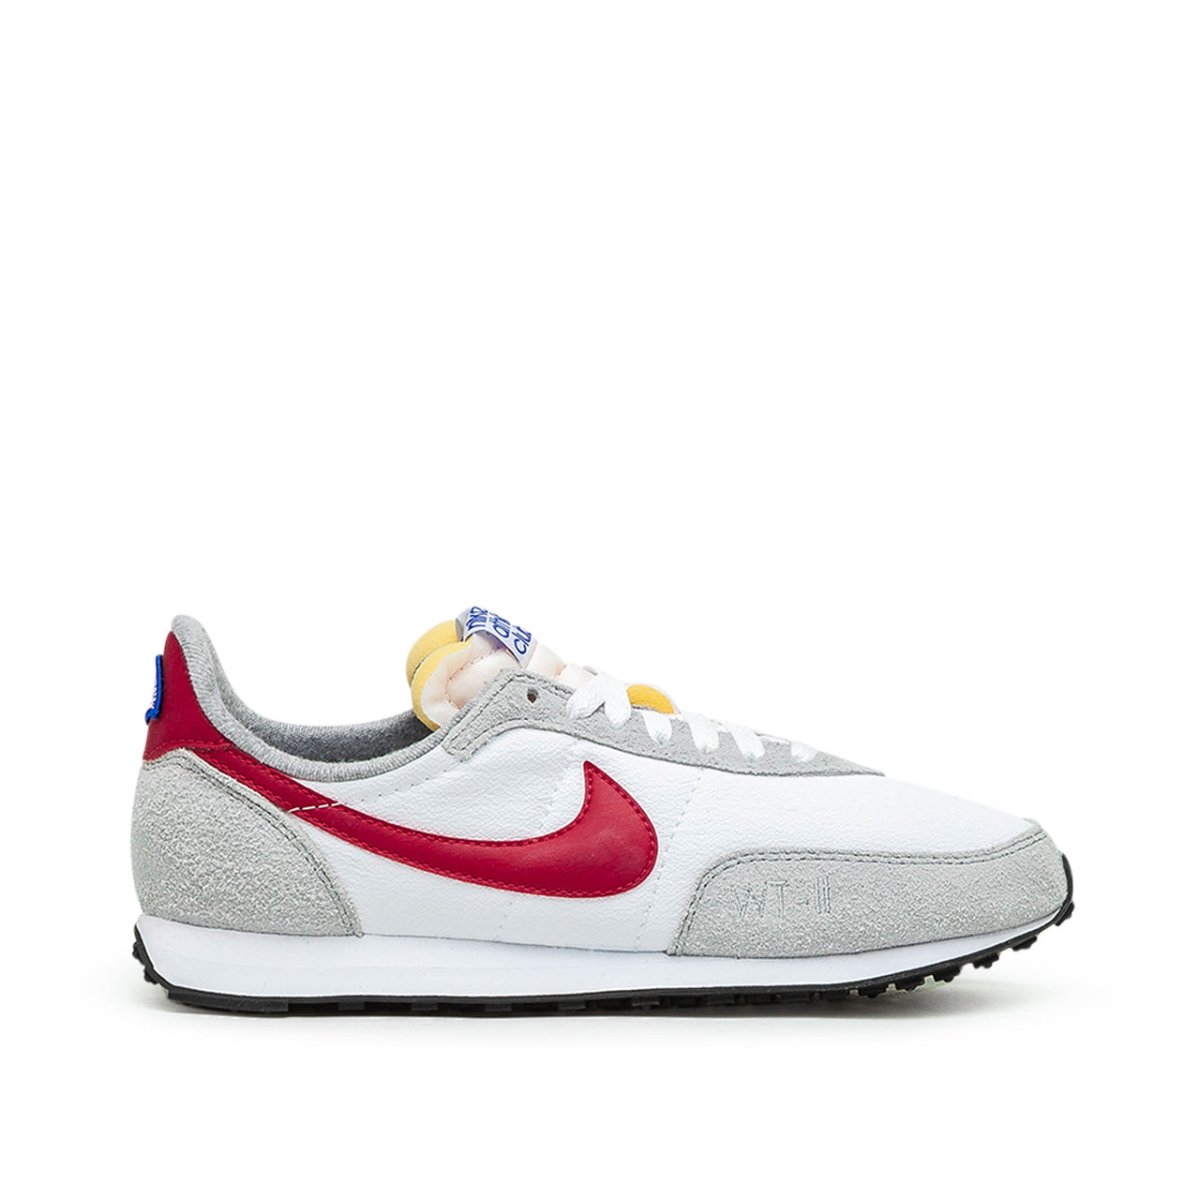 Image of Nike Waffle Trainer 2 (White / Red)